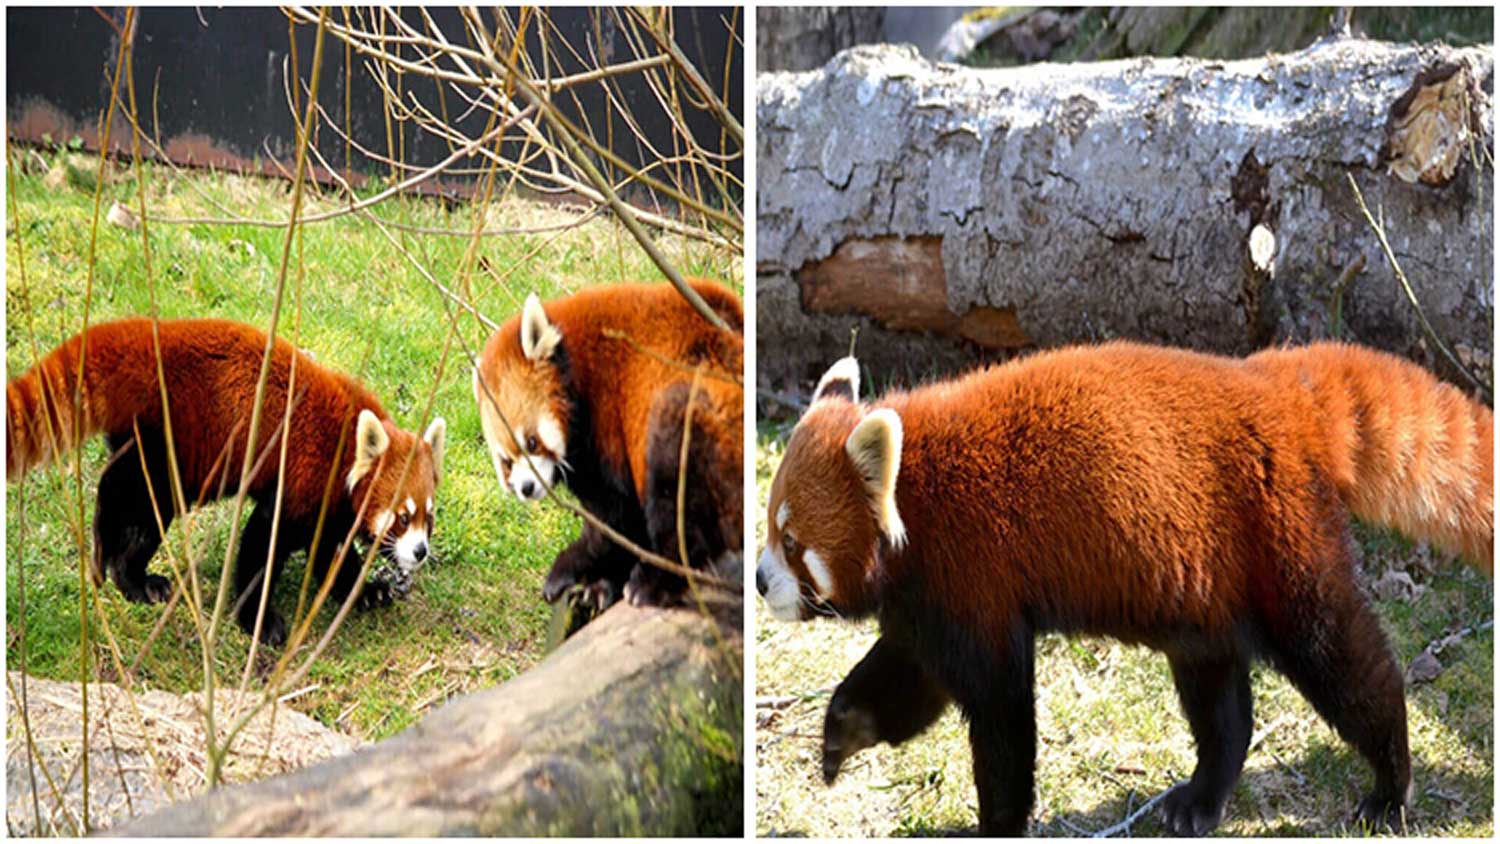 The Birth of Twin Red Pandas Is a Significant Development in Efforts to Conserve The Rare Species